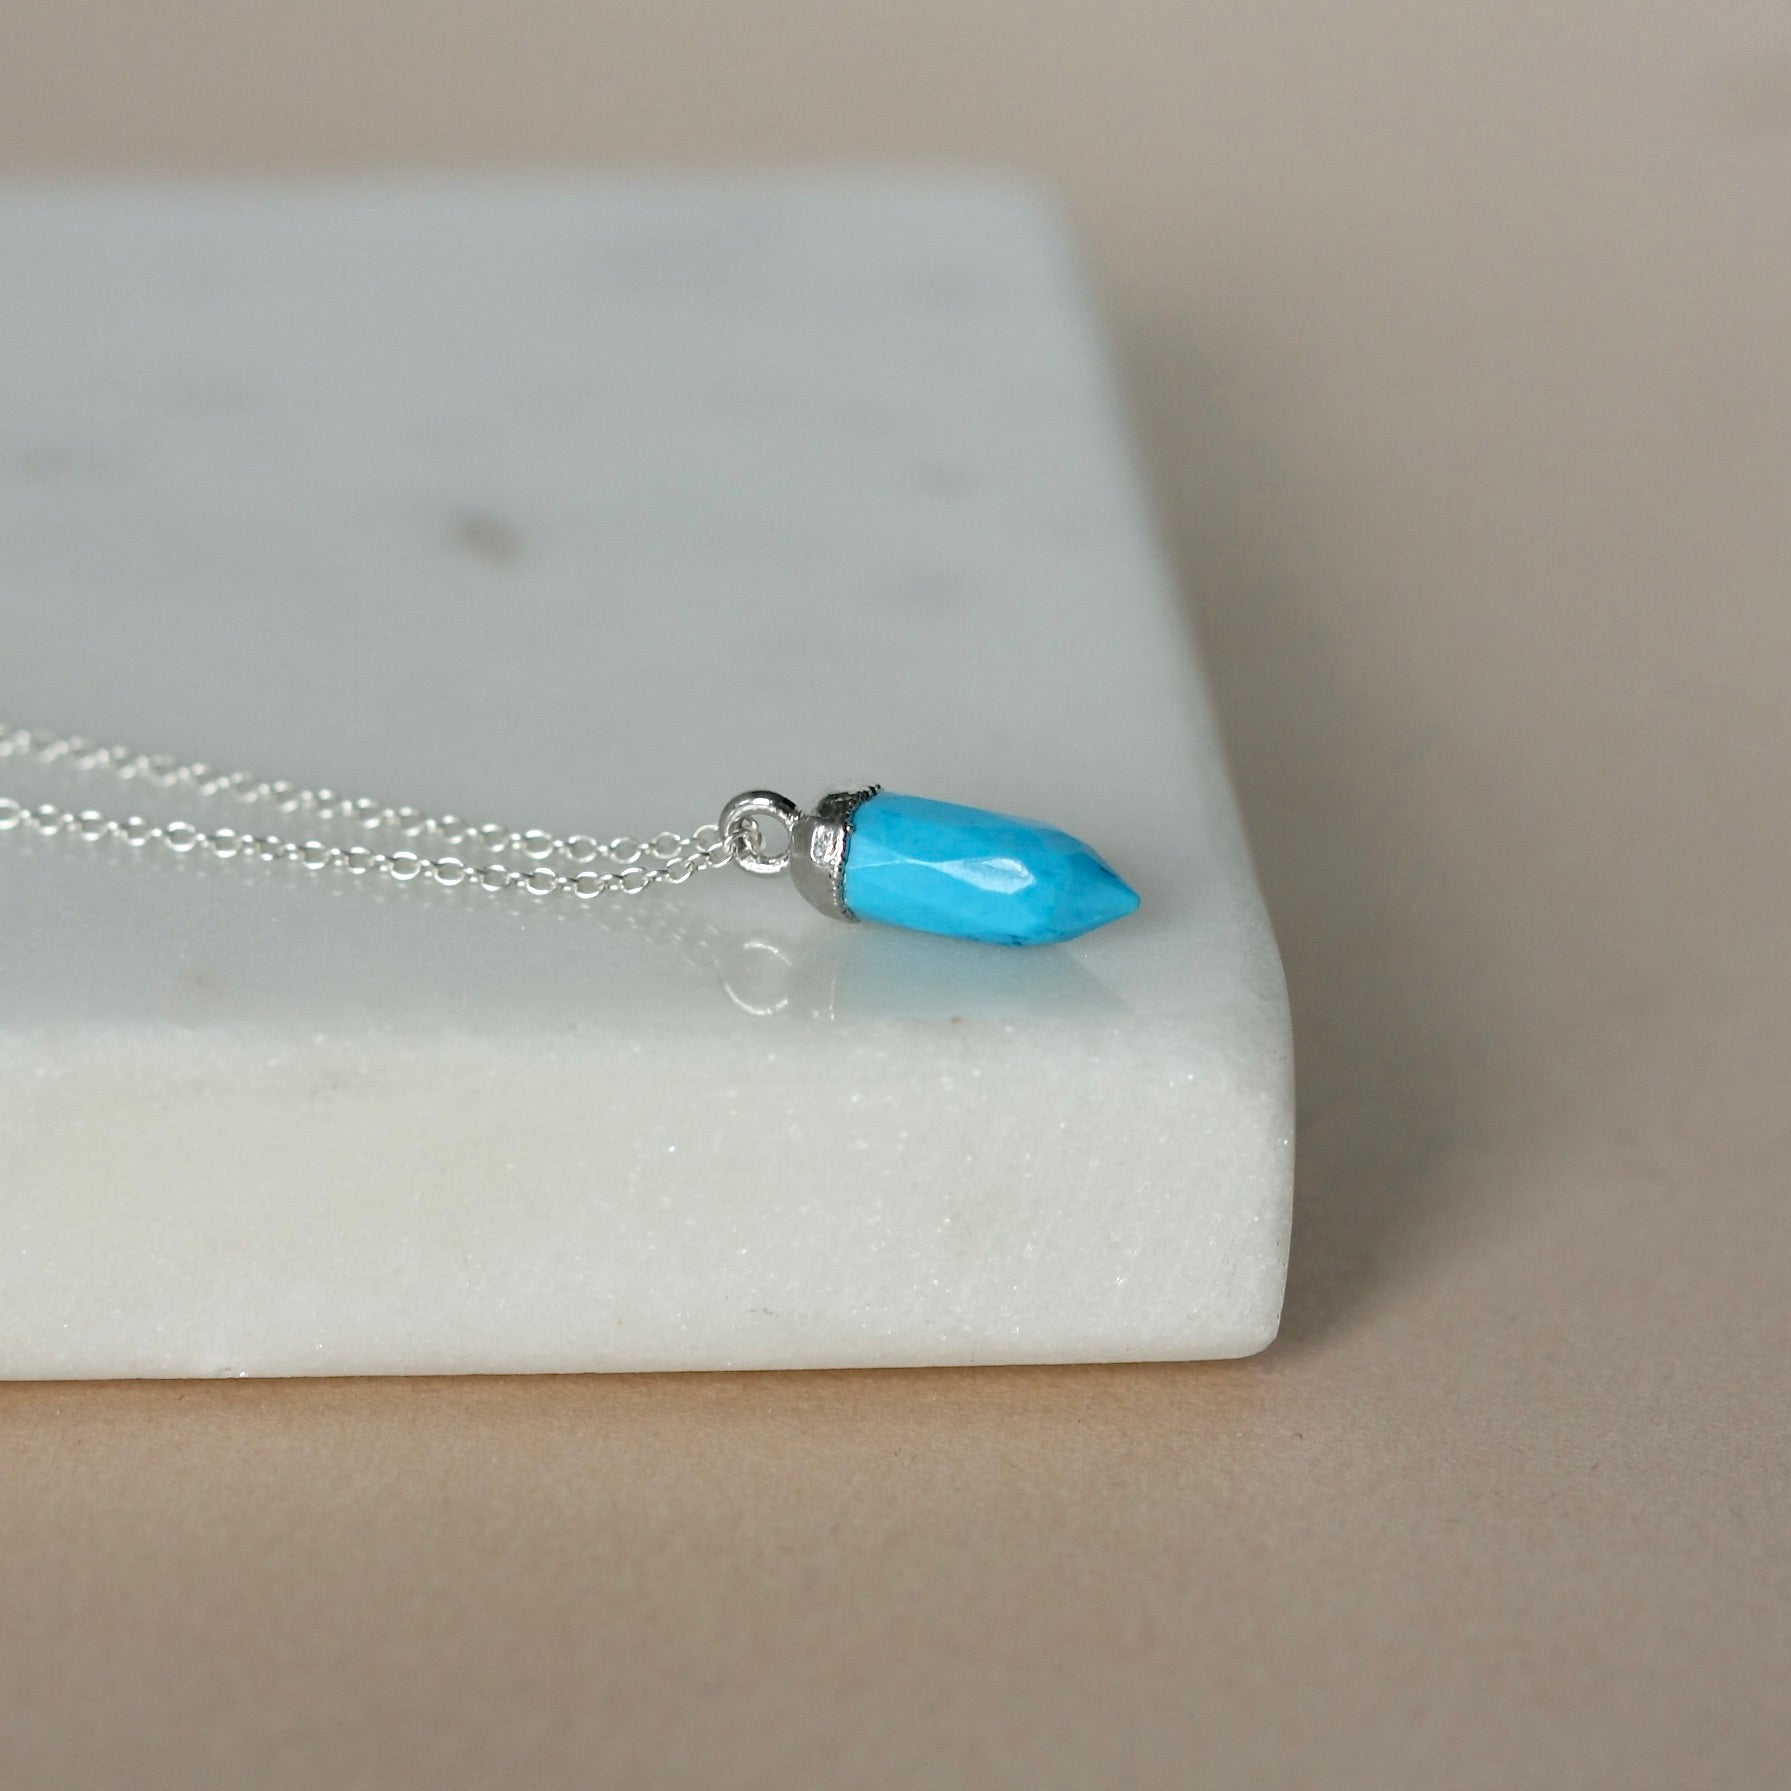 Sterling Silver Turquoise Spike Necklace